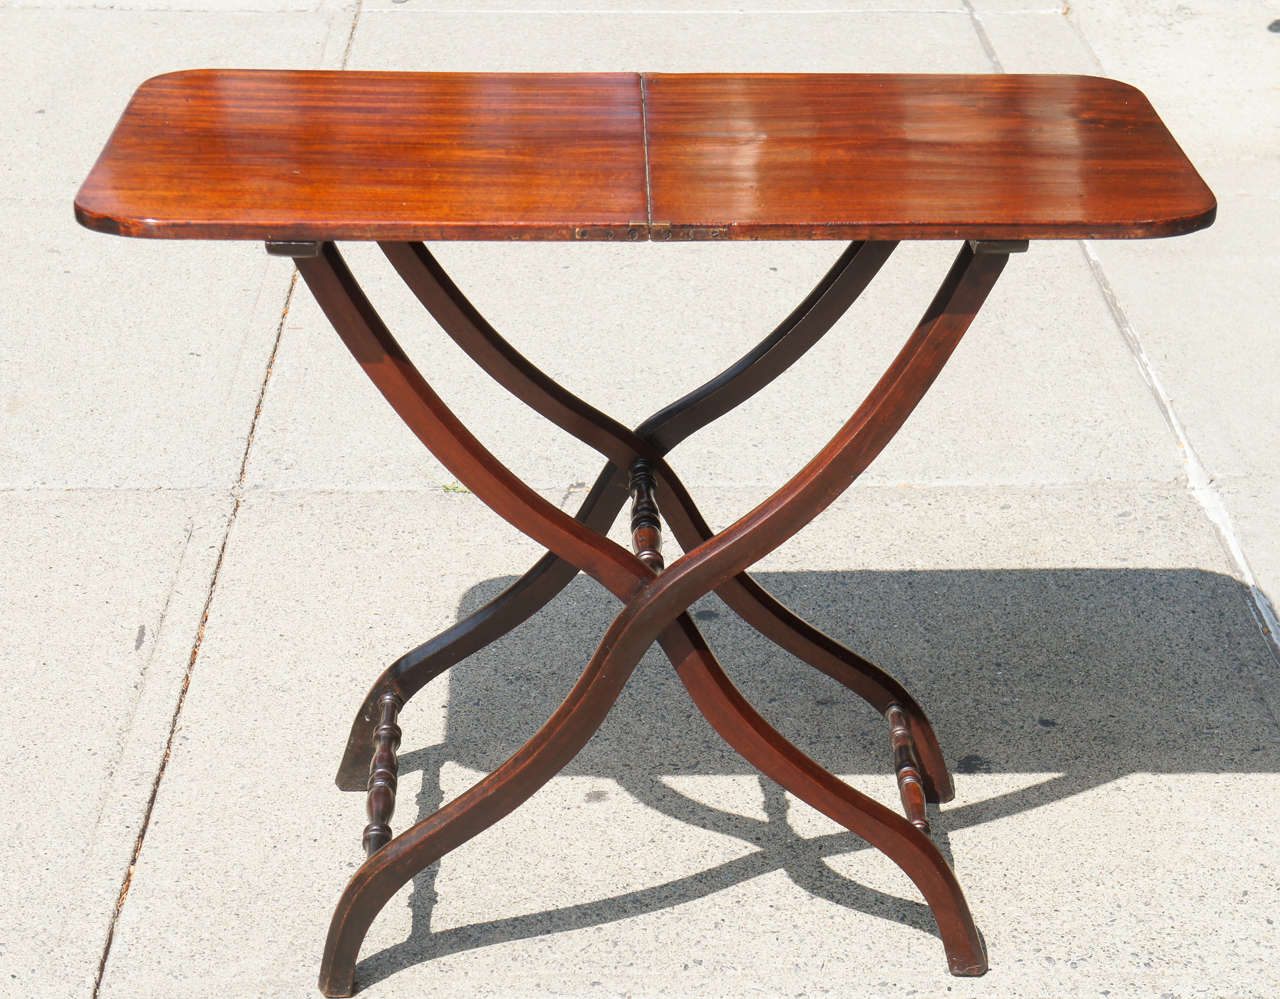 This table intended as a folding coaching table was made circa 1825 in England during the late Regency period. Designed to fold and be stored away the table was used during travel periods for a stable flat surface away from home. Made of